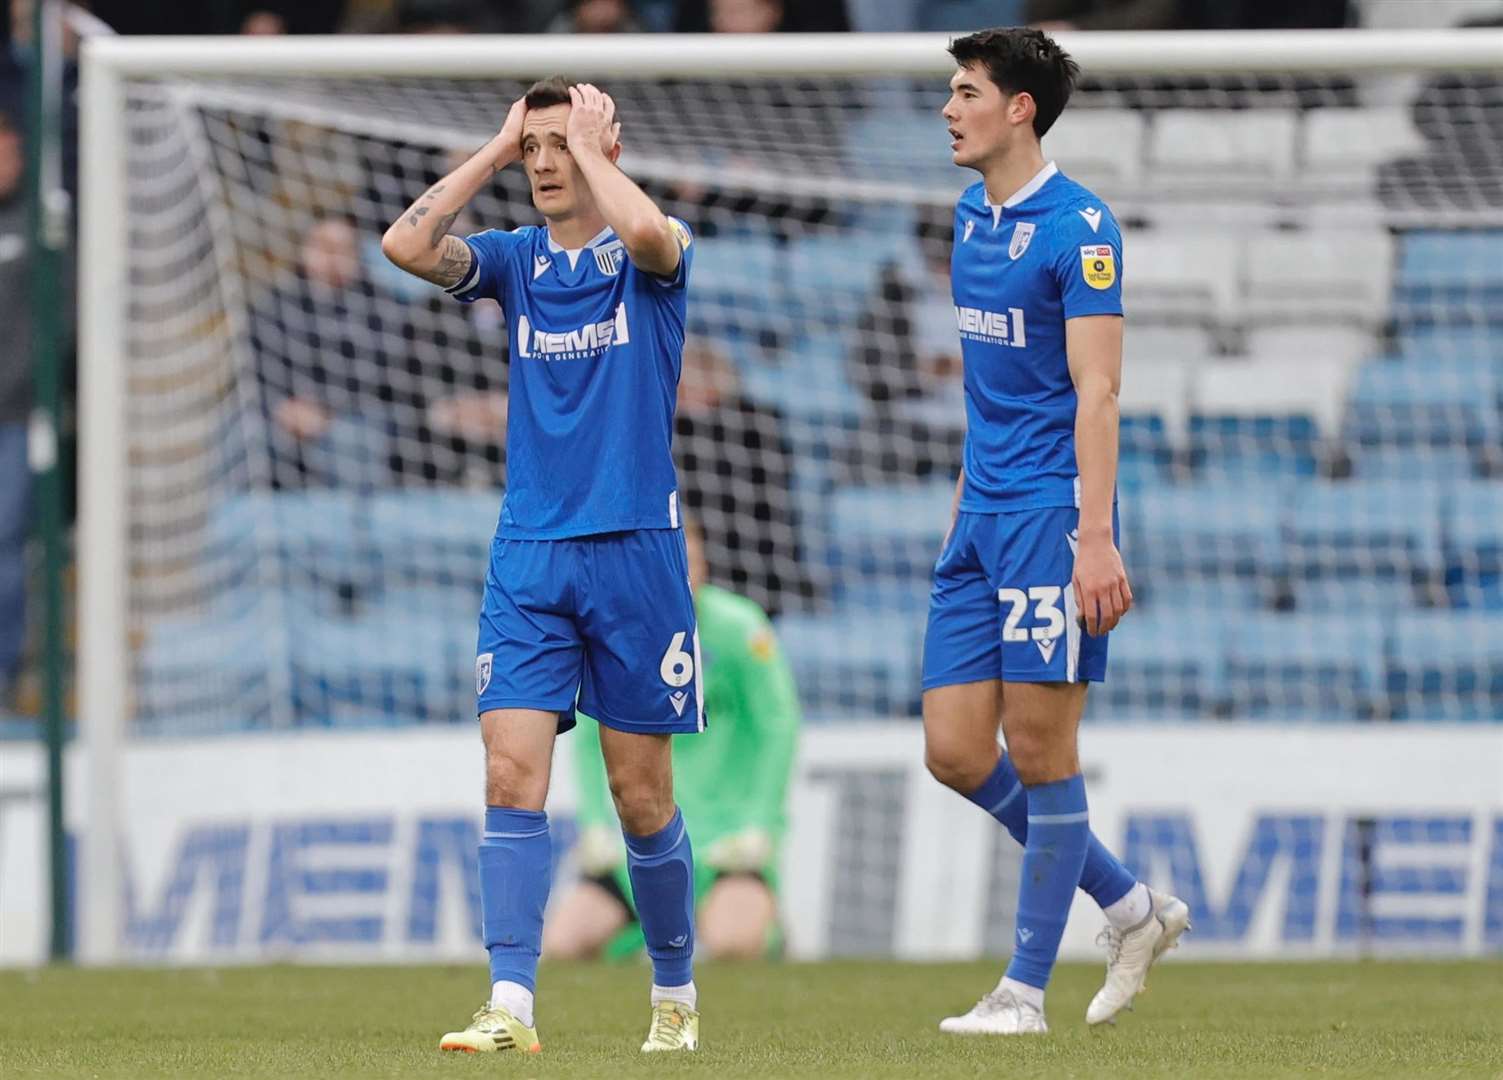 Gillingham shipped three second-half goals against Salford